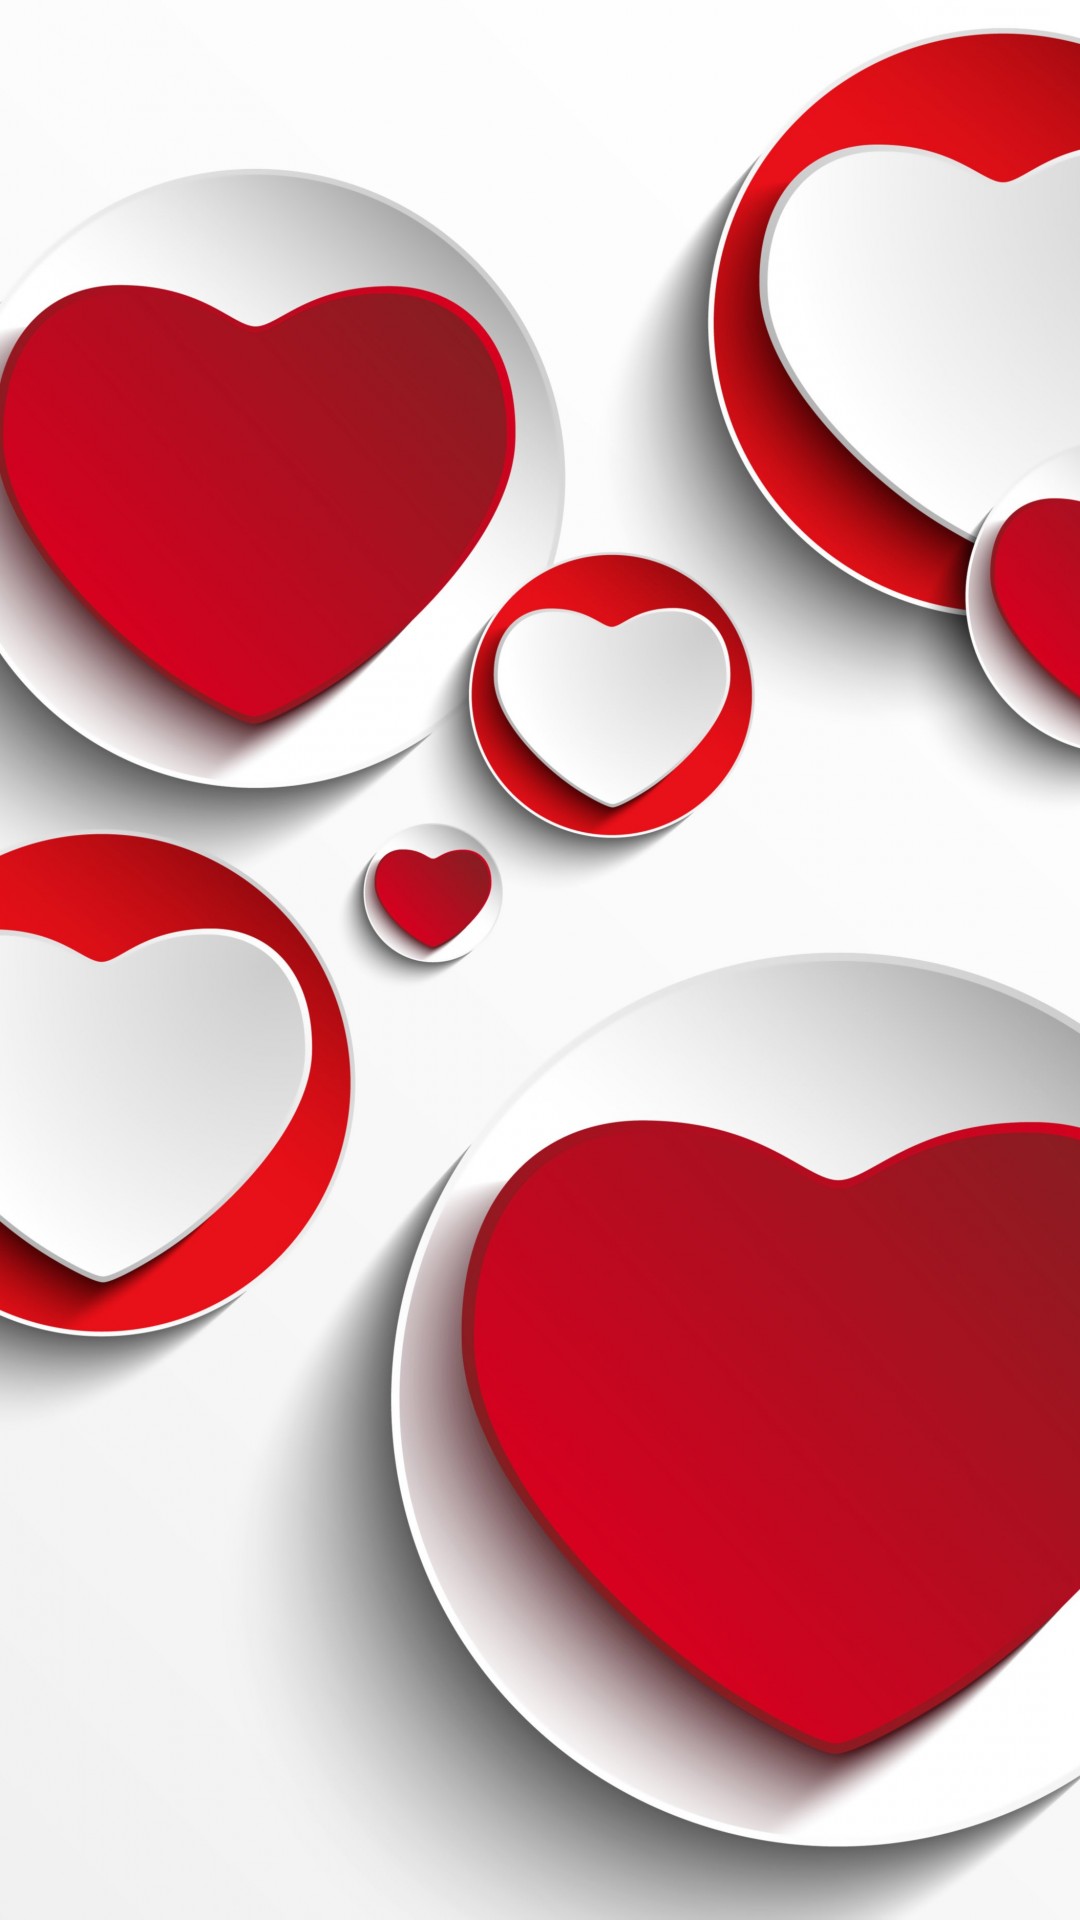 Minimalistic Hearts Shapes Wallpaper for HTC One